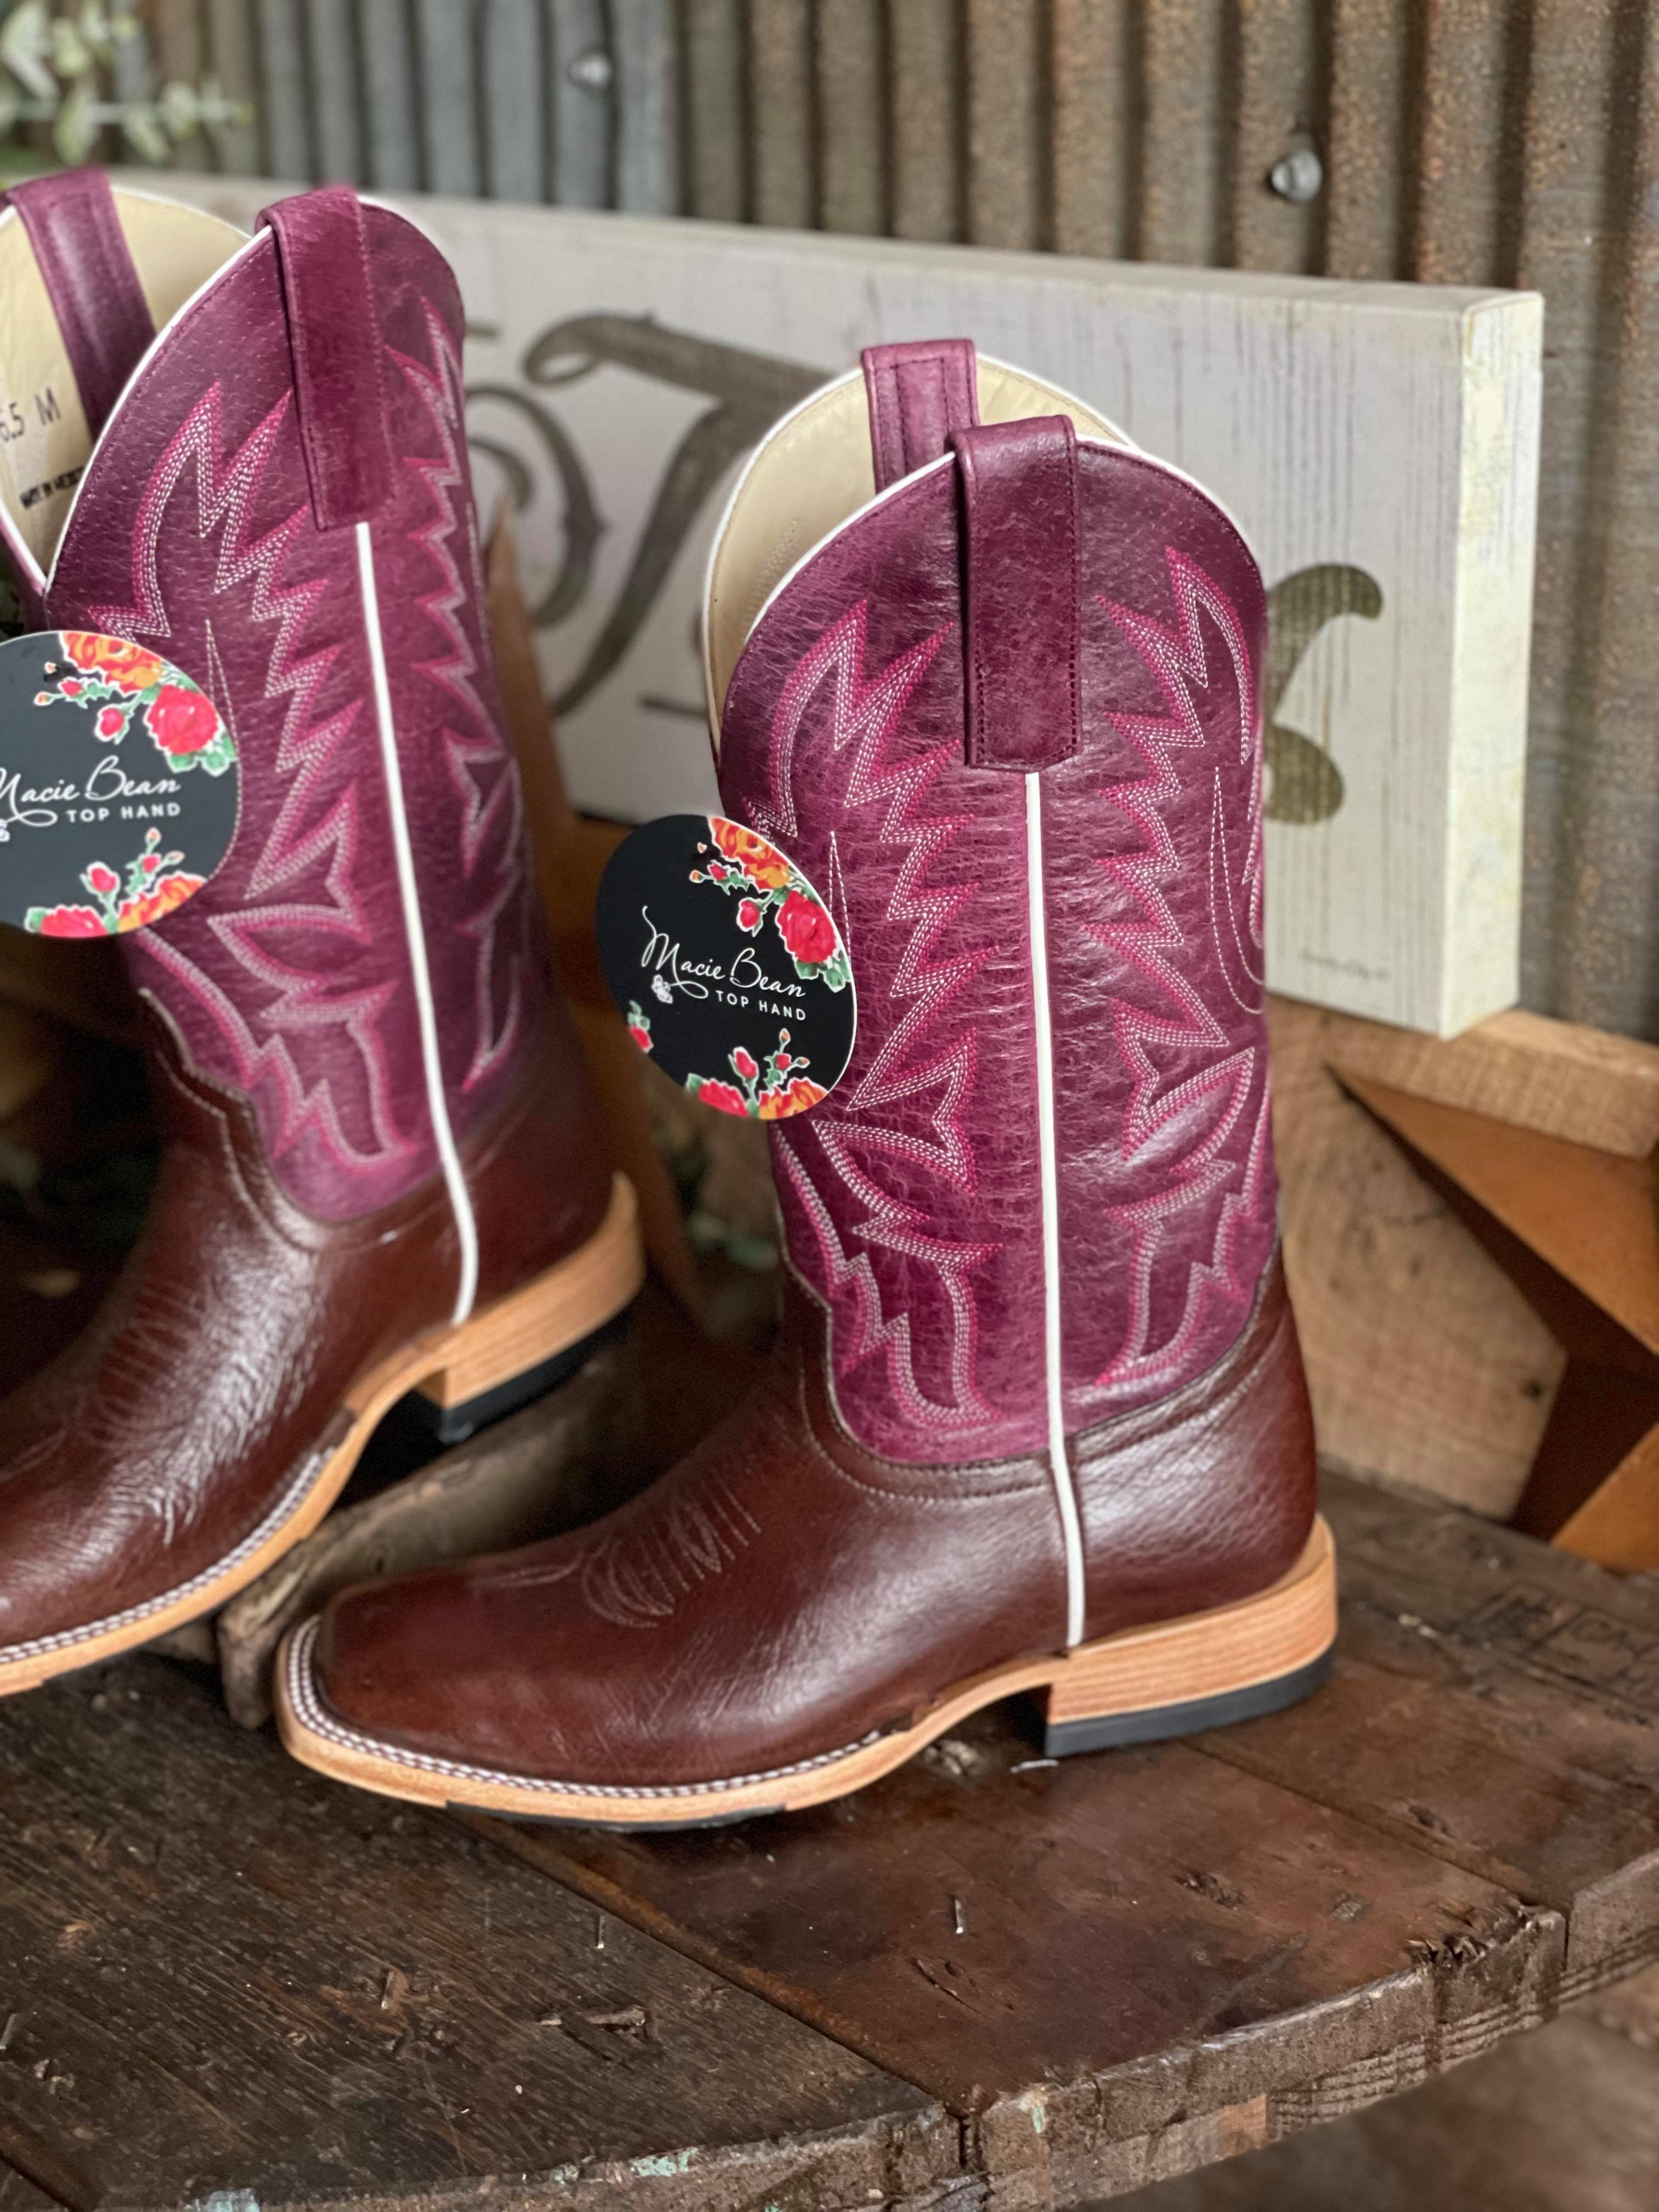 MB Women's Kango Tobacco Smooth Quill Boots-Women's Boots-Macie Bean-Lucky J Boots & More, Women's, Men's, & Kids Western Store Located in Carthage, MO